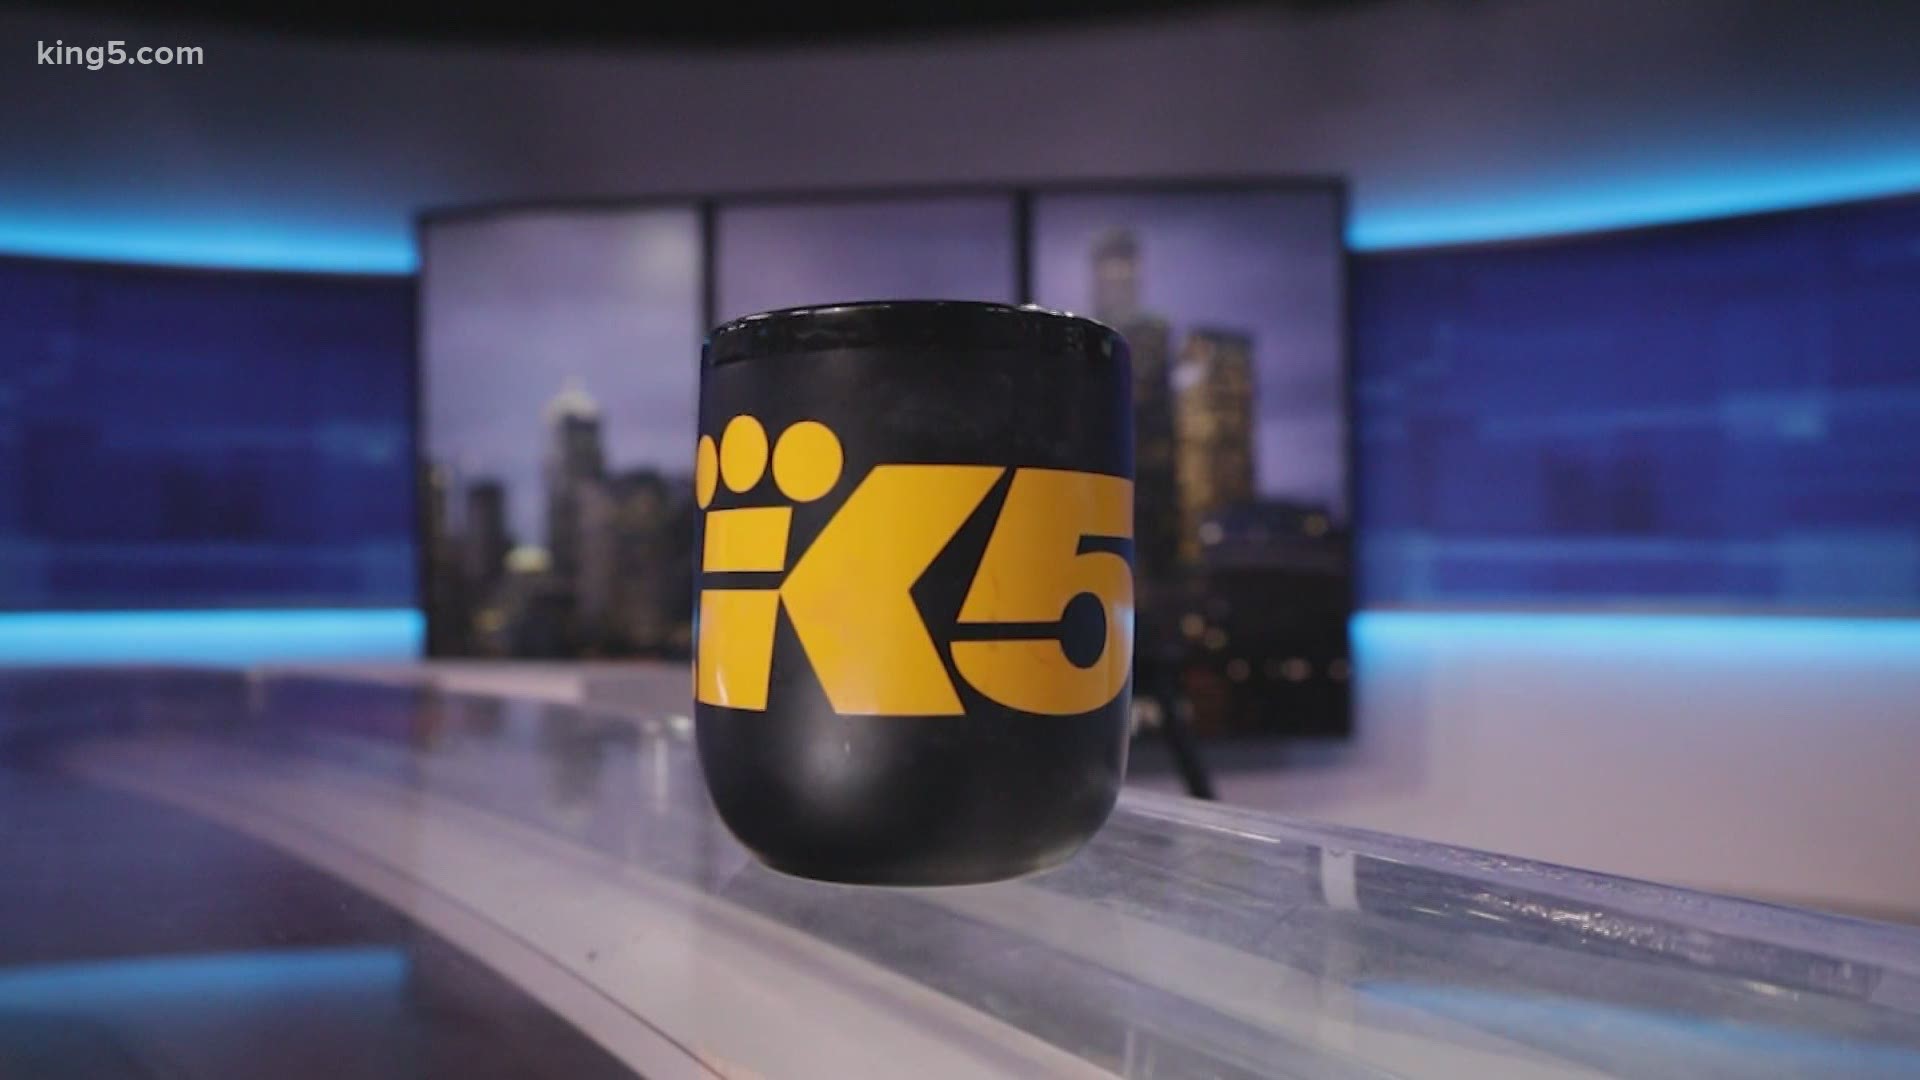 There’s a new effort underway to uncover racial bias in KING 5’s newsroom and on its airwaves.